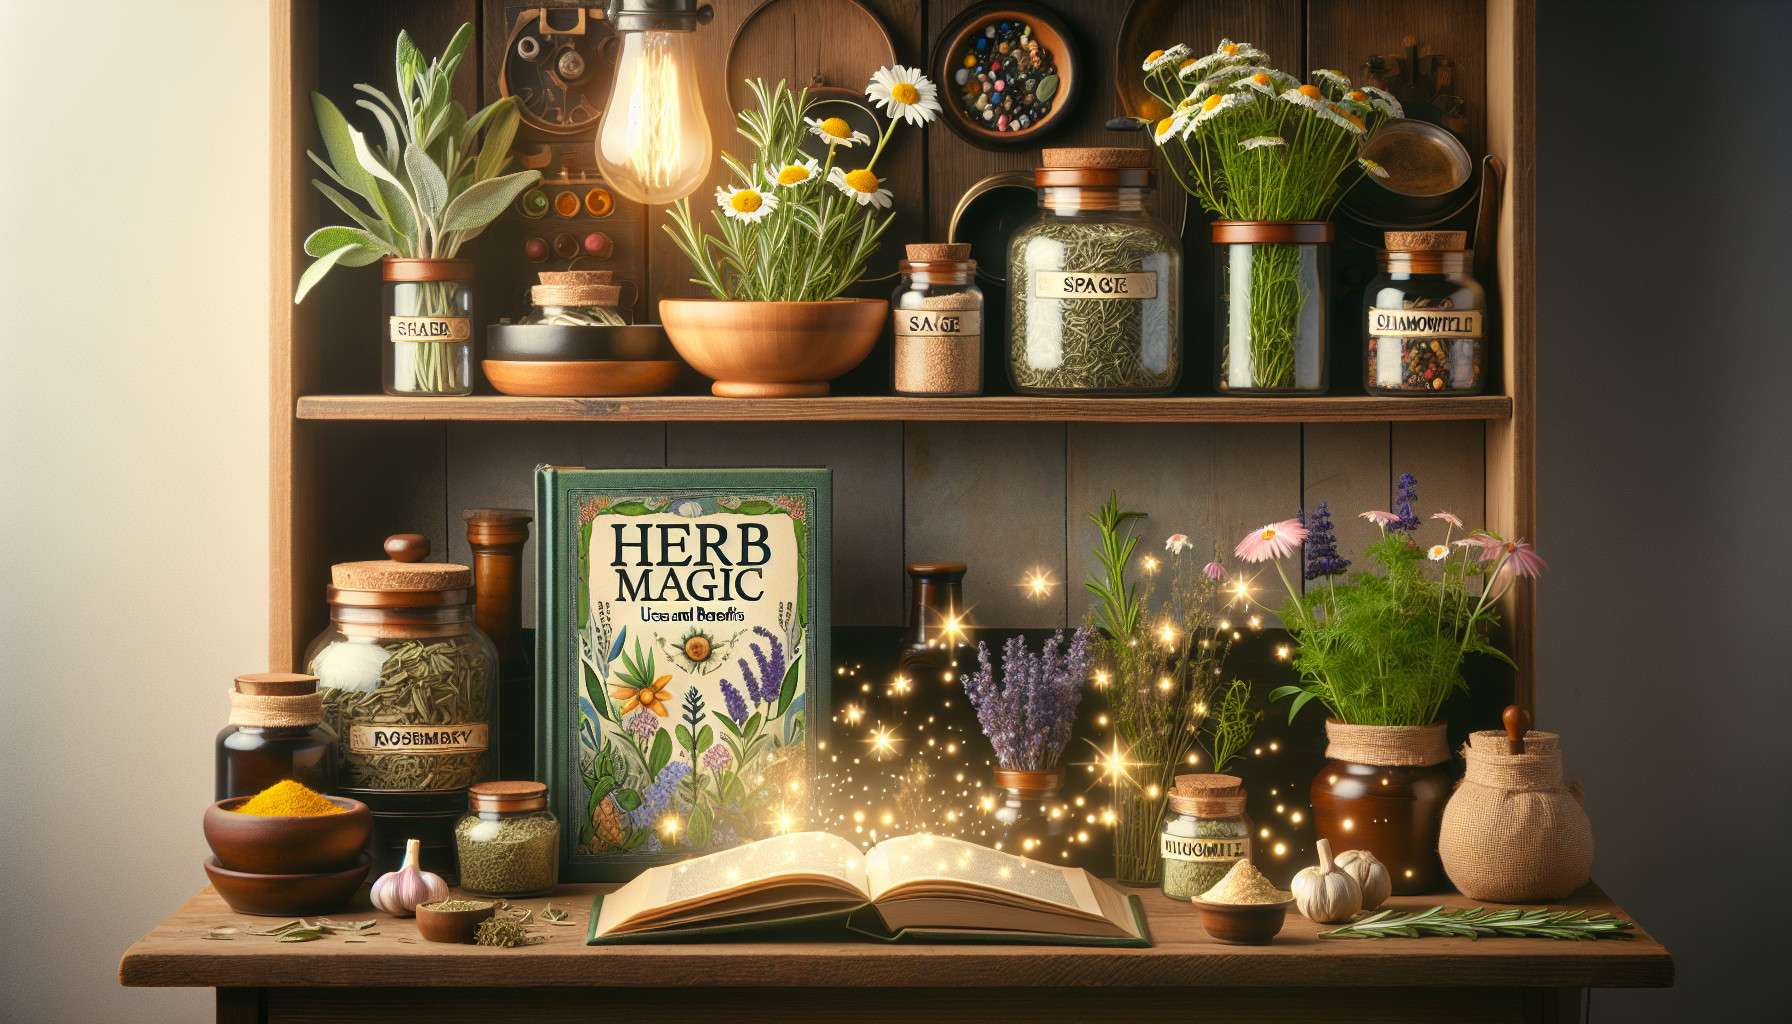 Where Can I Find Herbal Magick Witch Herbs For Sale And What Are They For?